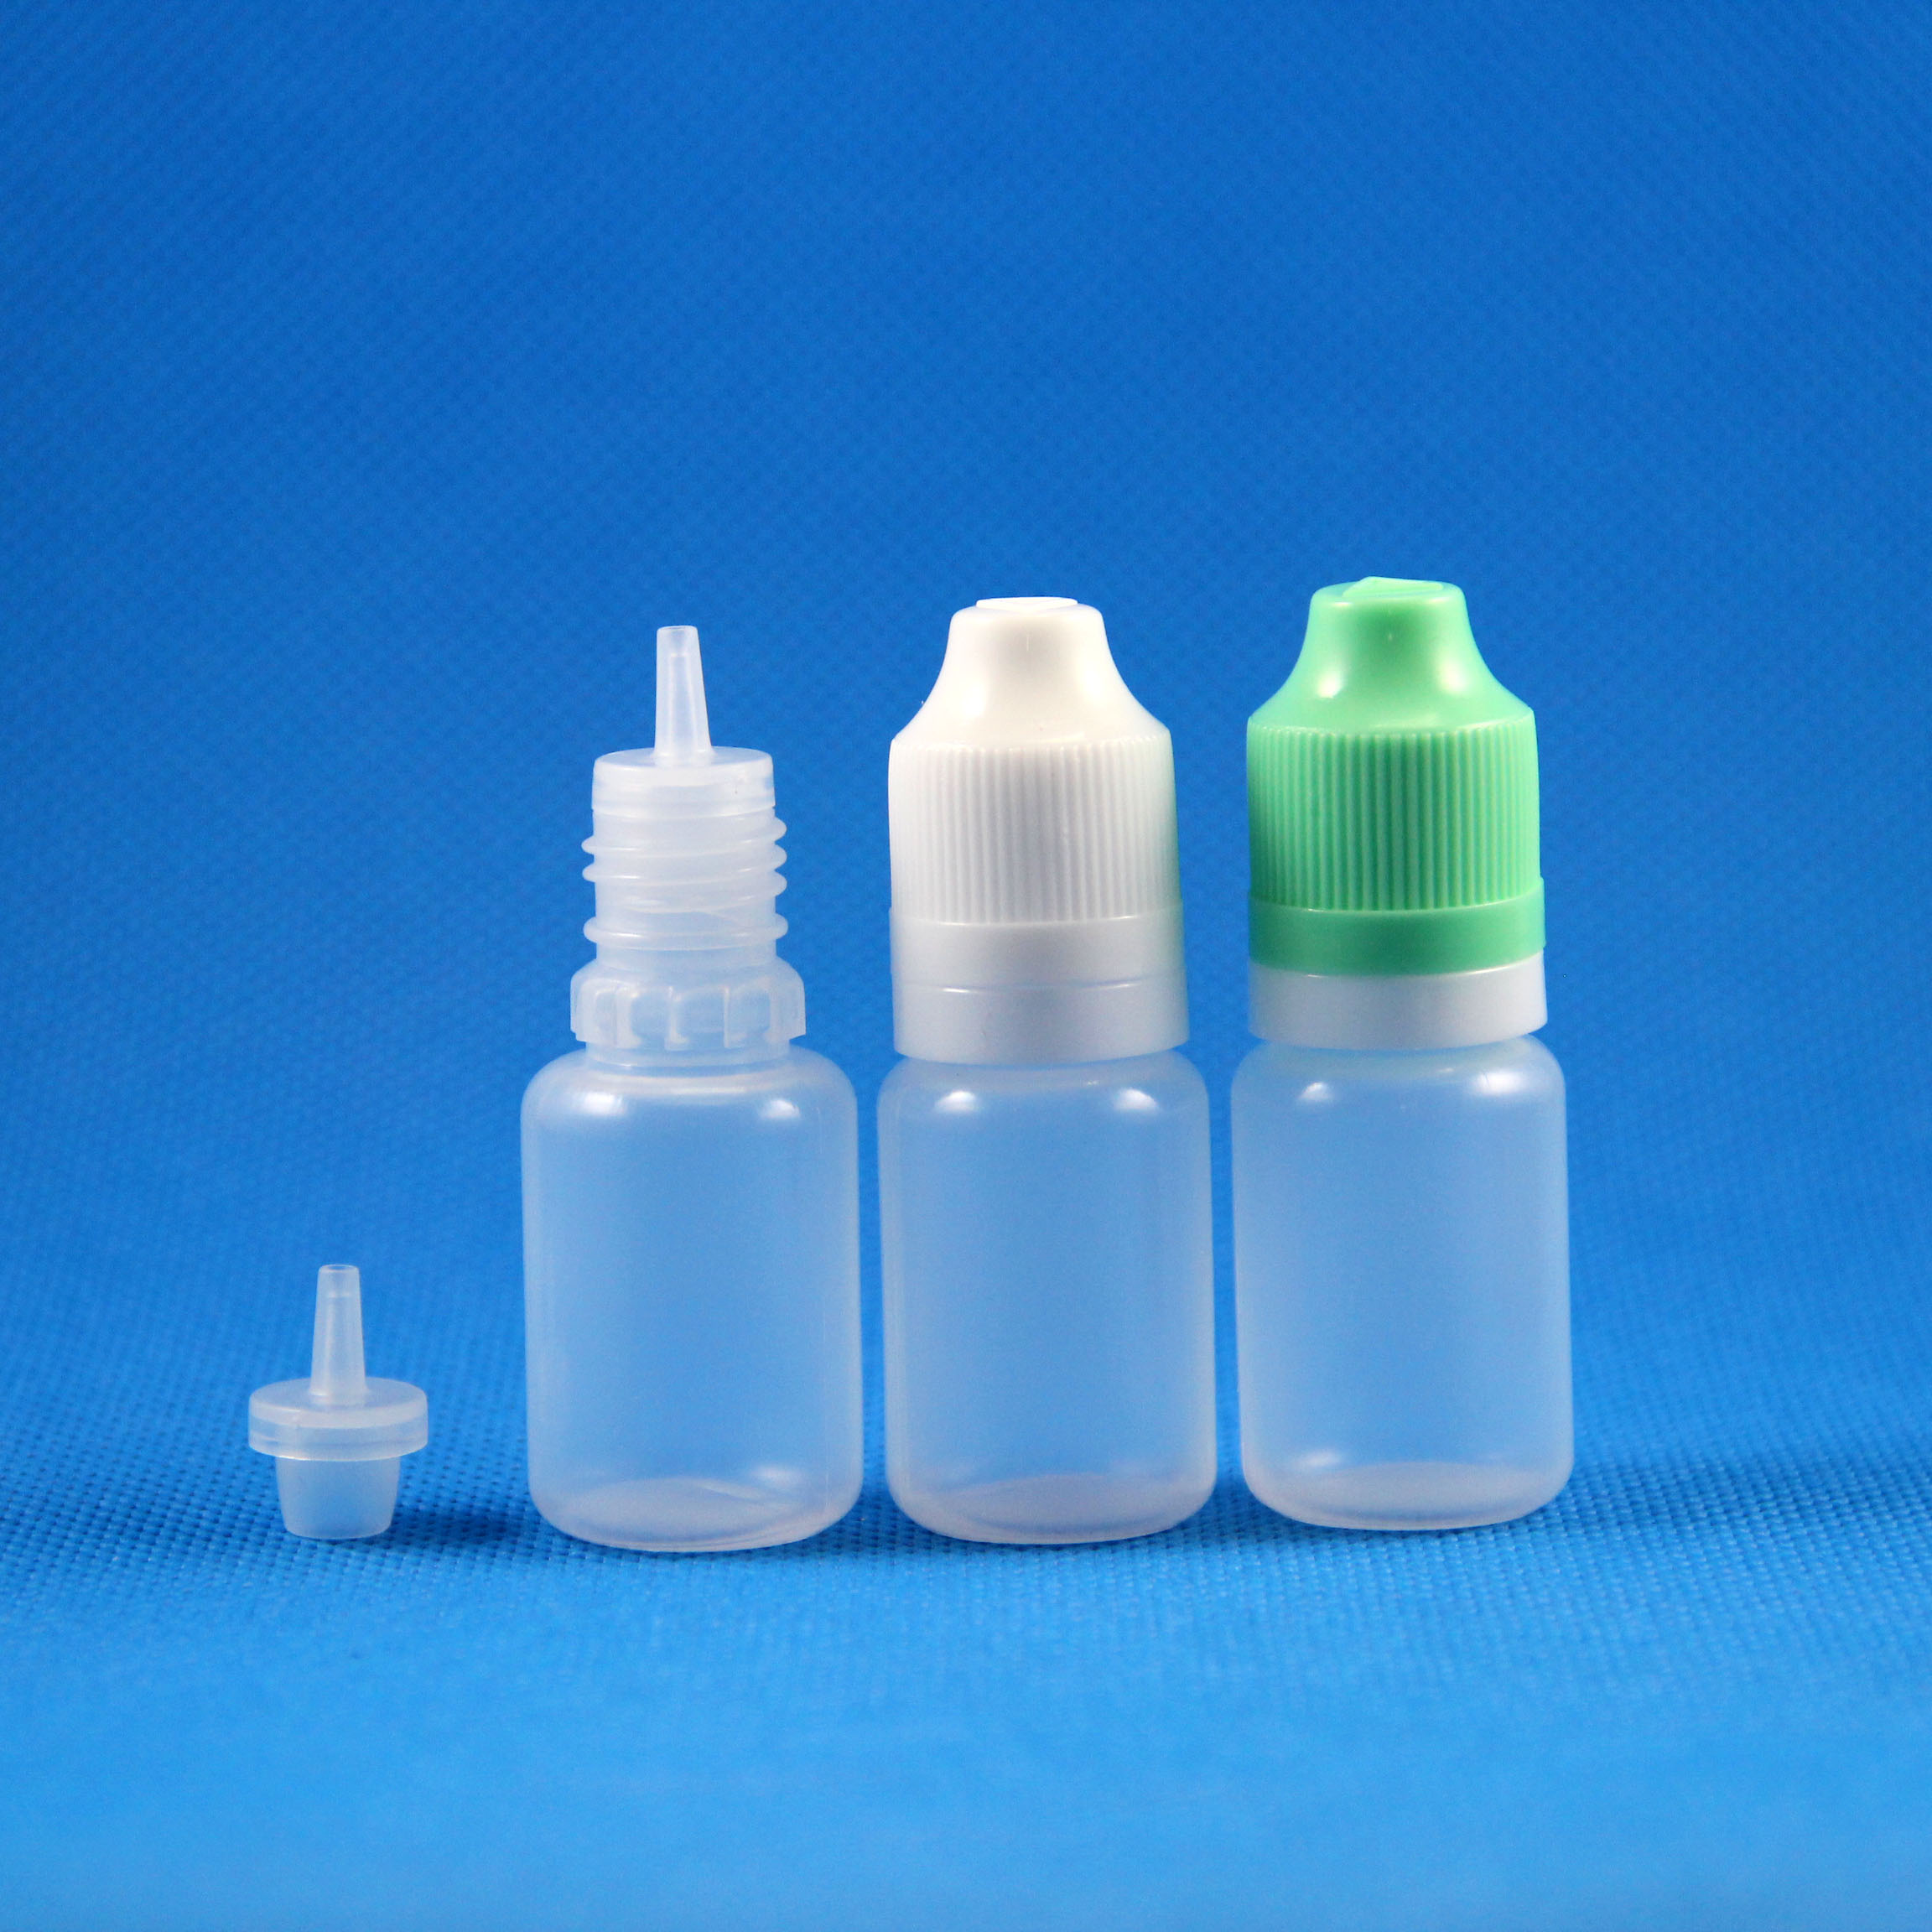 100 10 ML LDPE Plastic Dropper Bottles Child & Tamper Proof caps - Click Image to Close